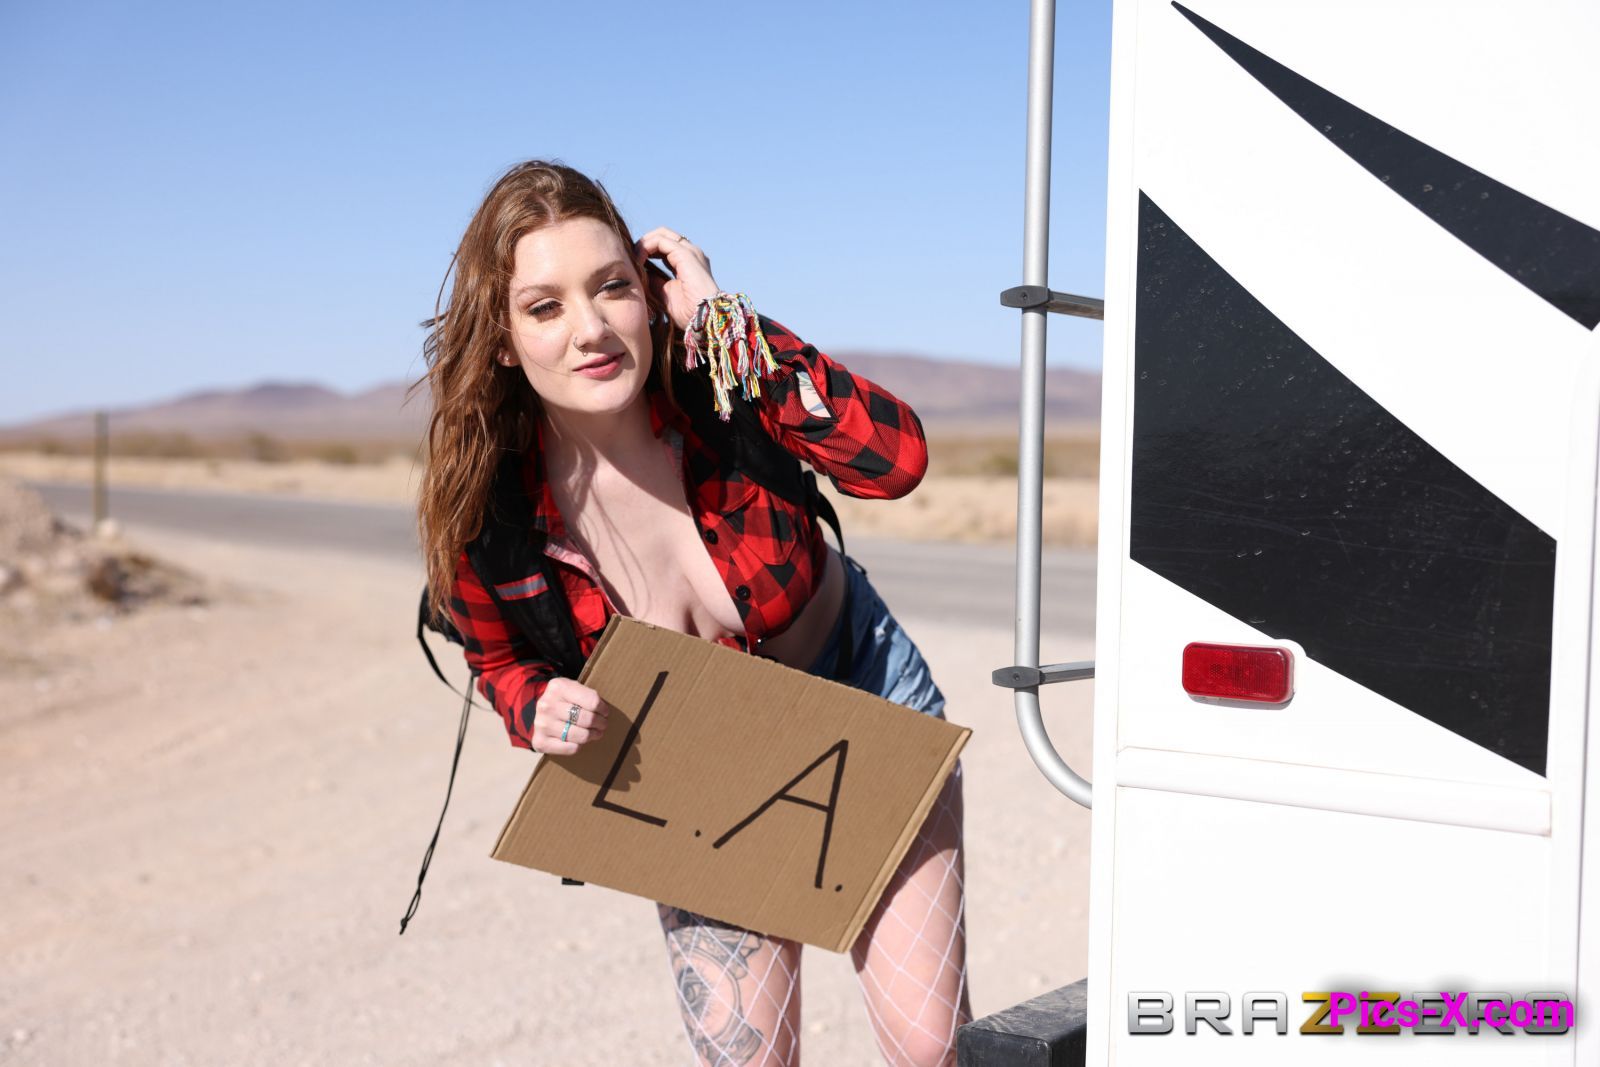 The Road Trip: Raunchy RV-ing - Brazzers Exxtra - Image 25